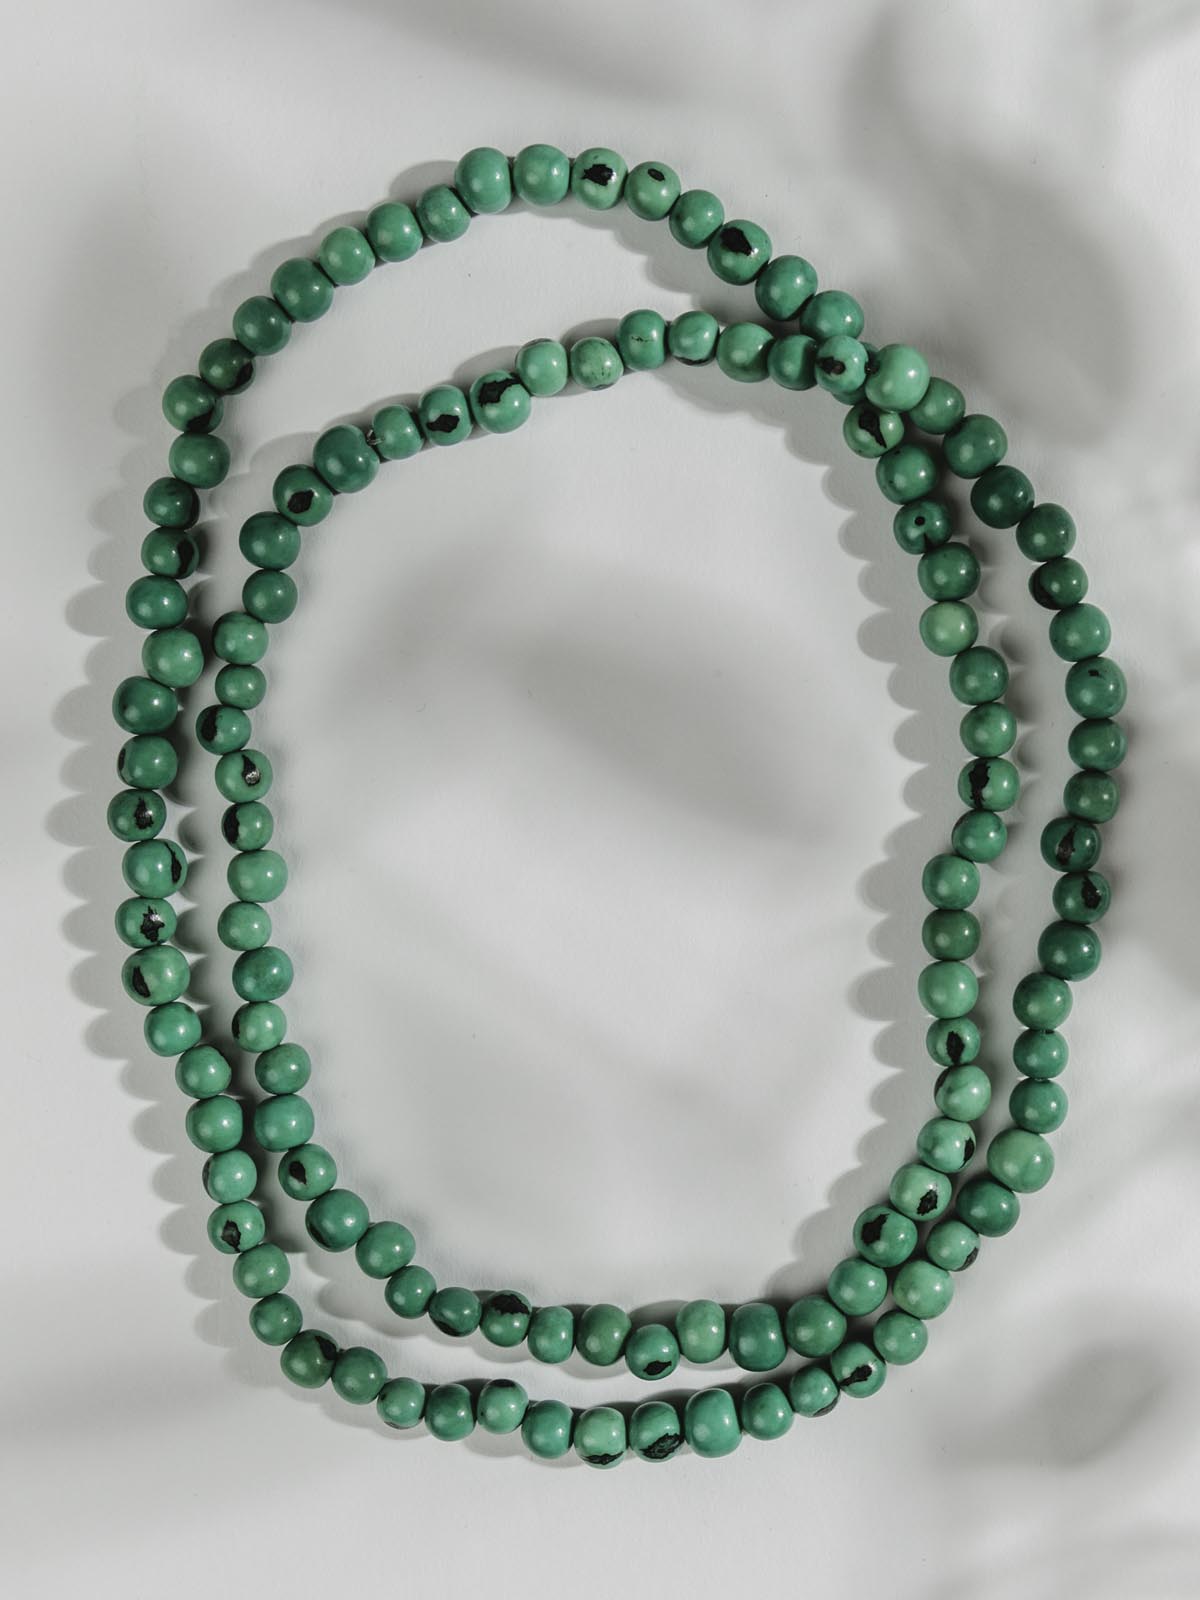 Turquoise necklace laying on a white surface.